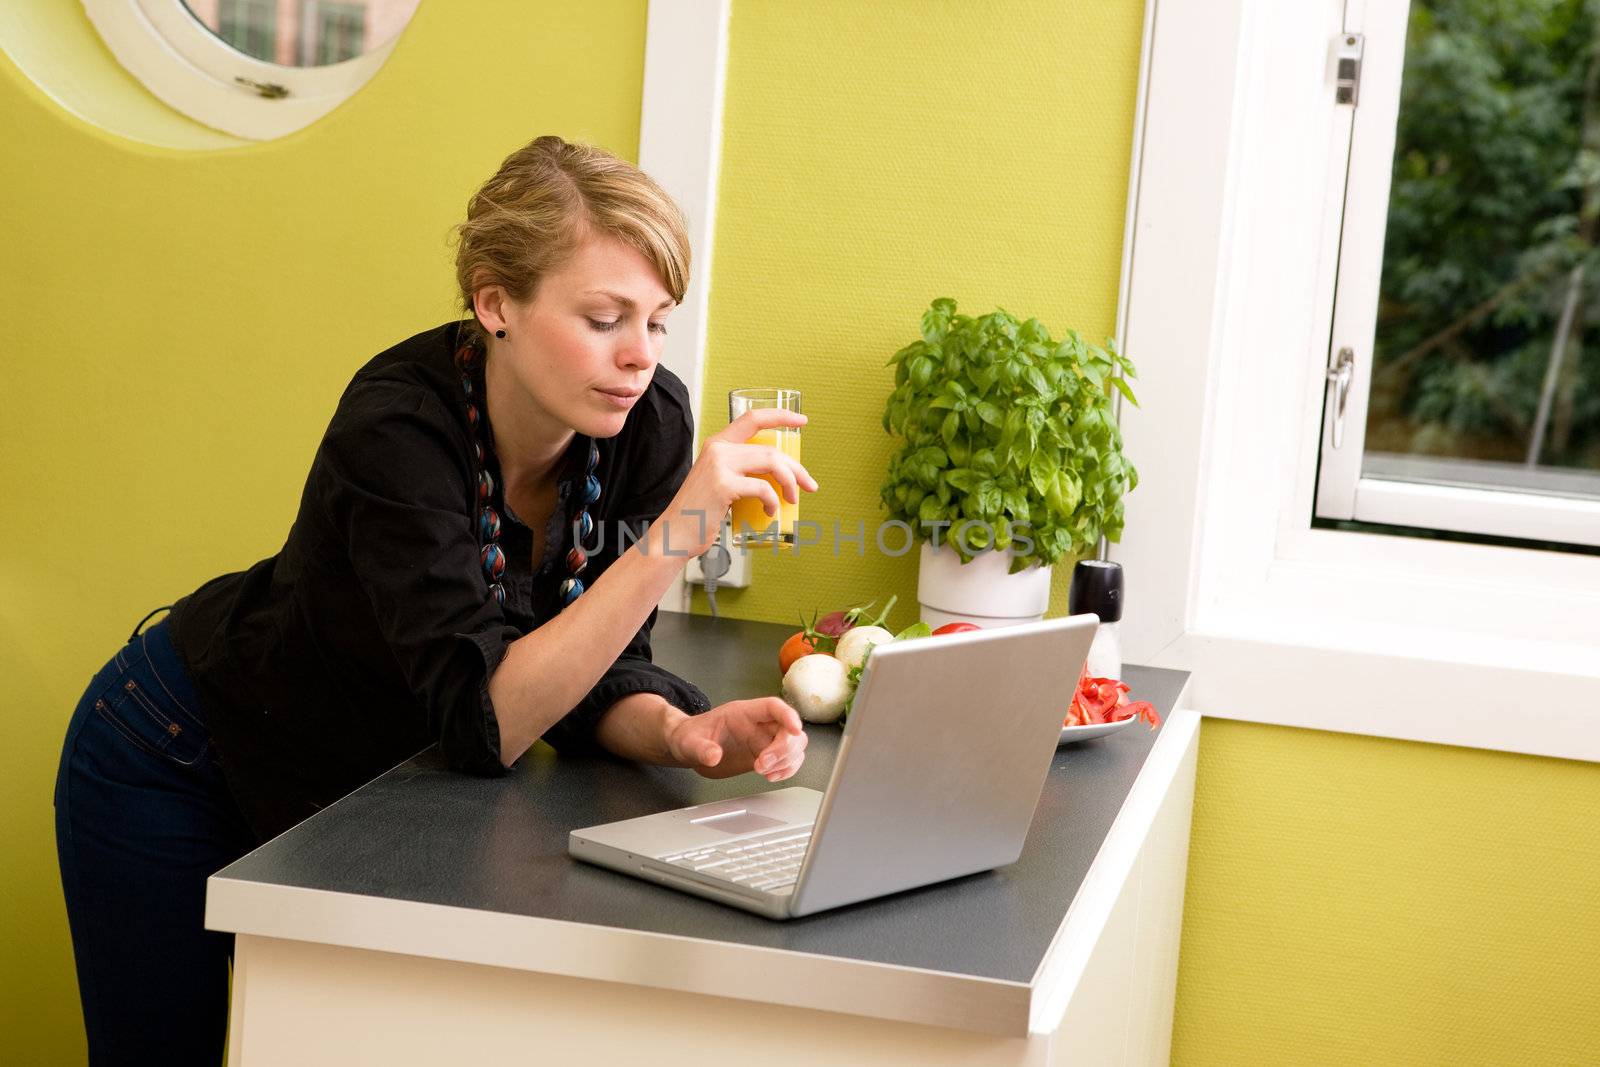 A woman using her laptop over a light healthy snack in the kitchen.